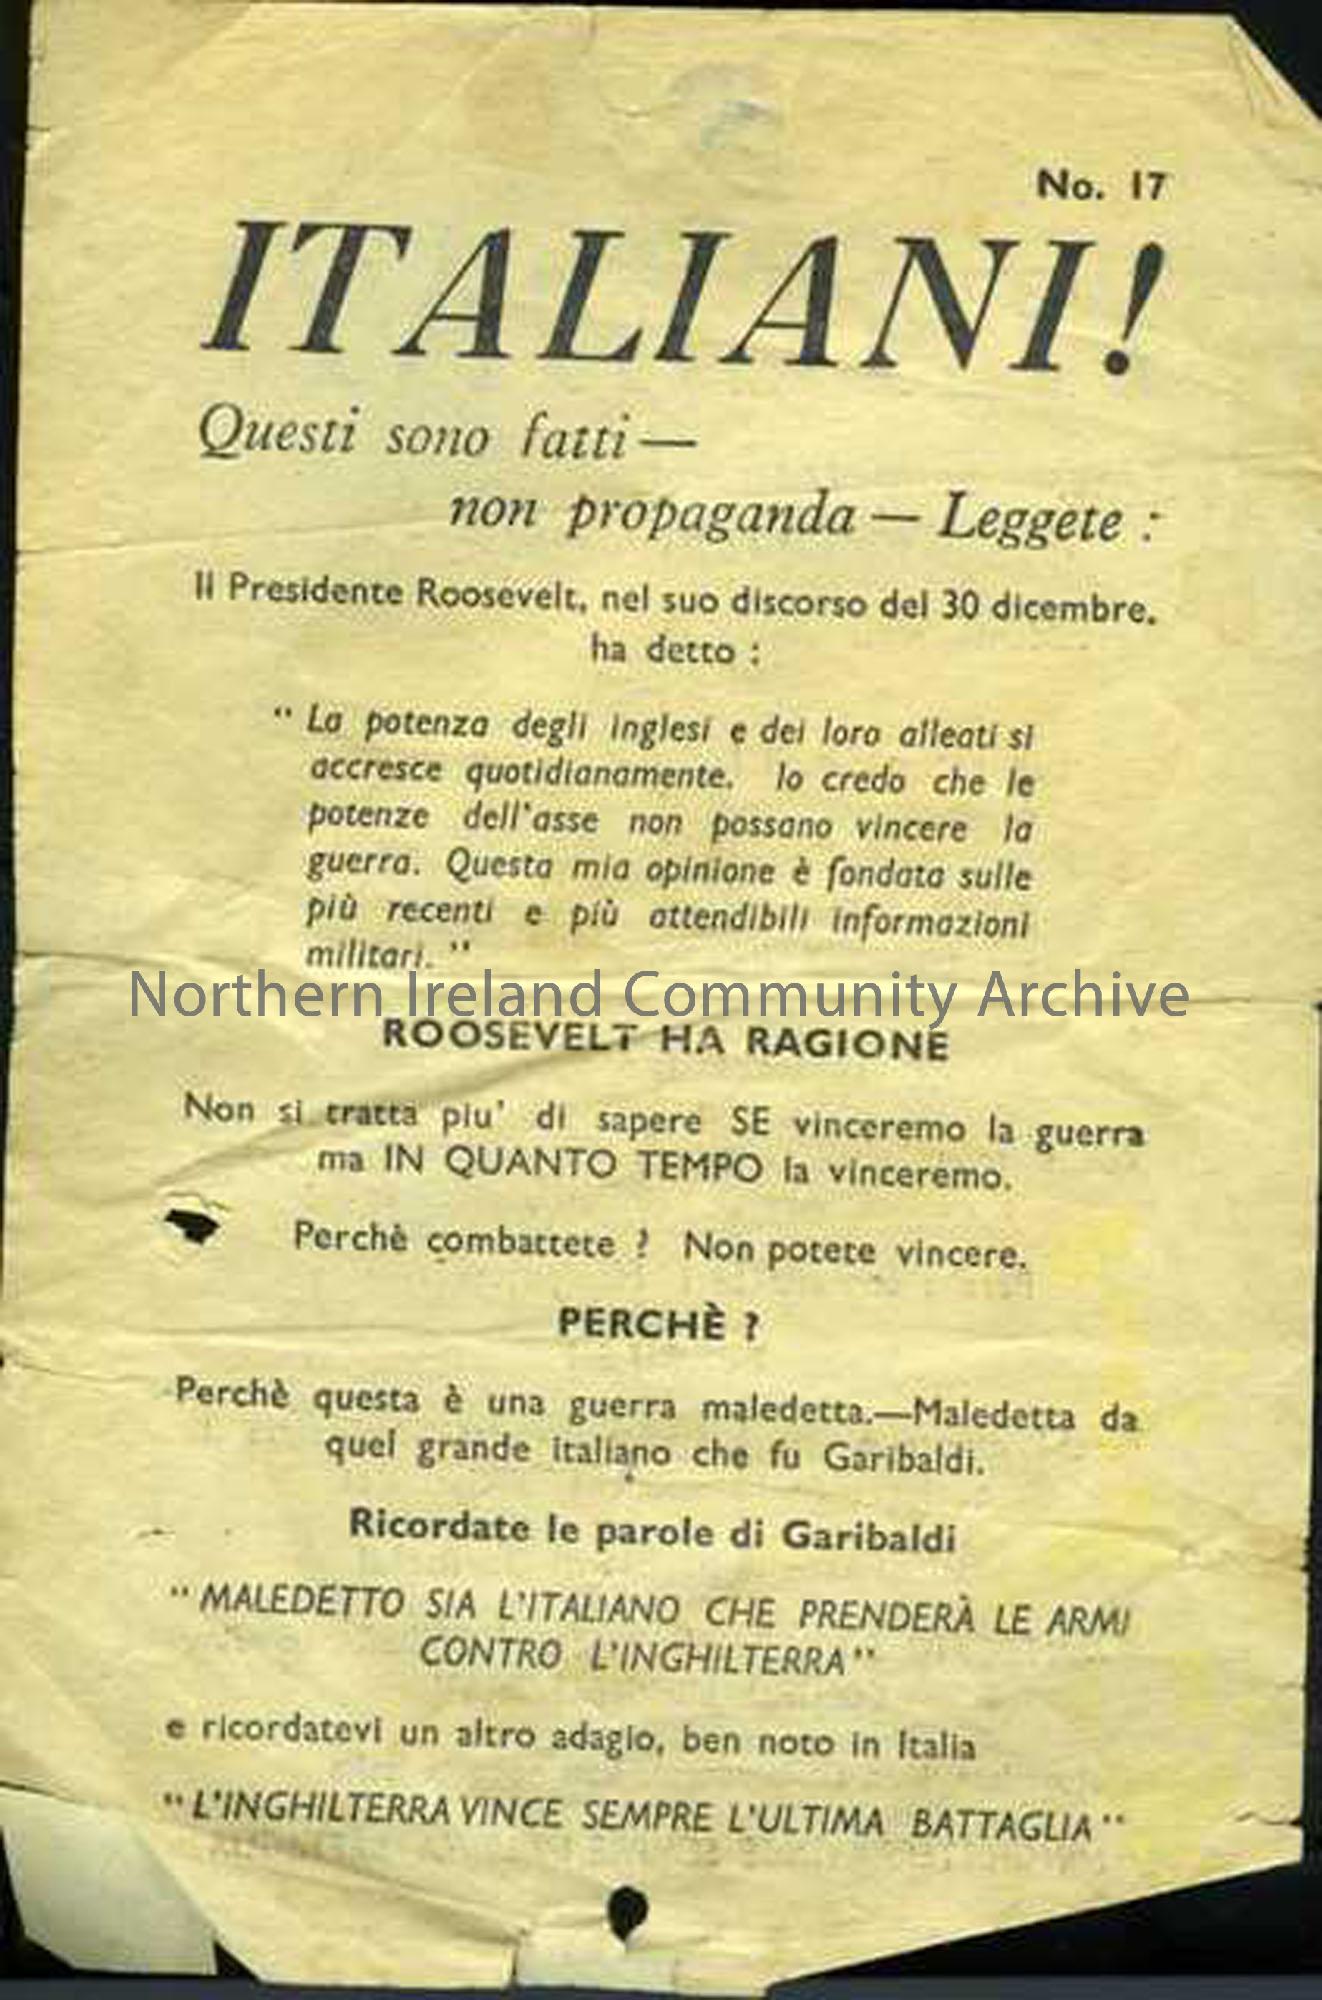 Information leaflet for soldiers in Italian